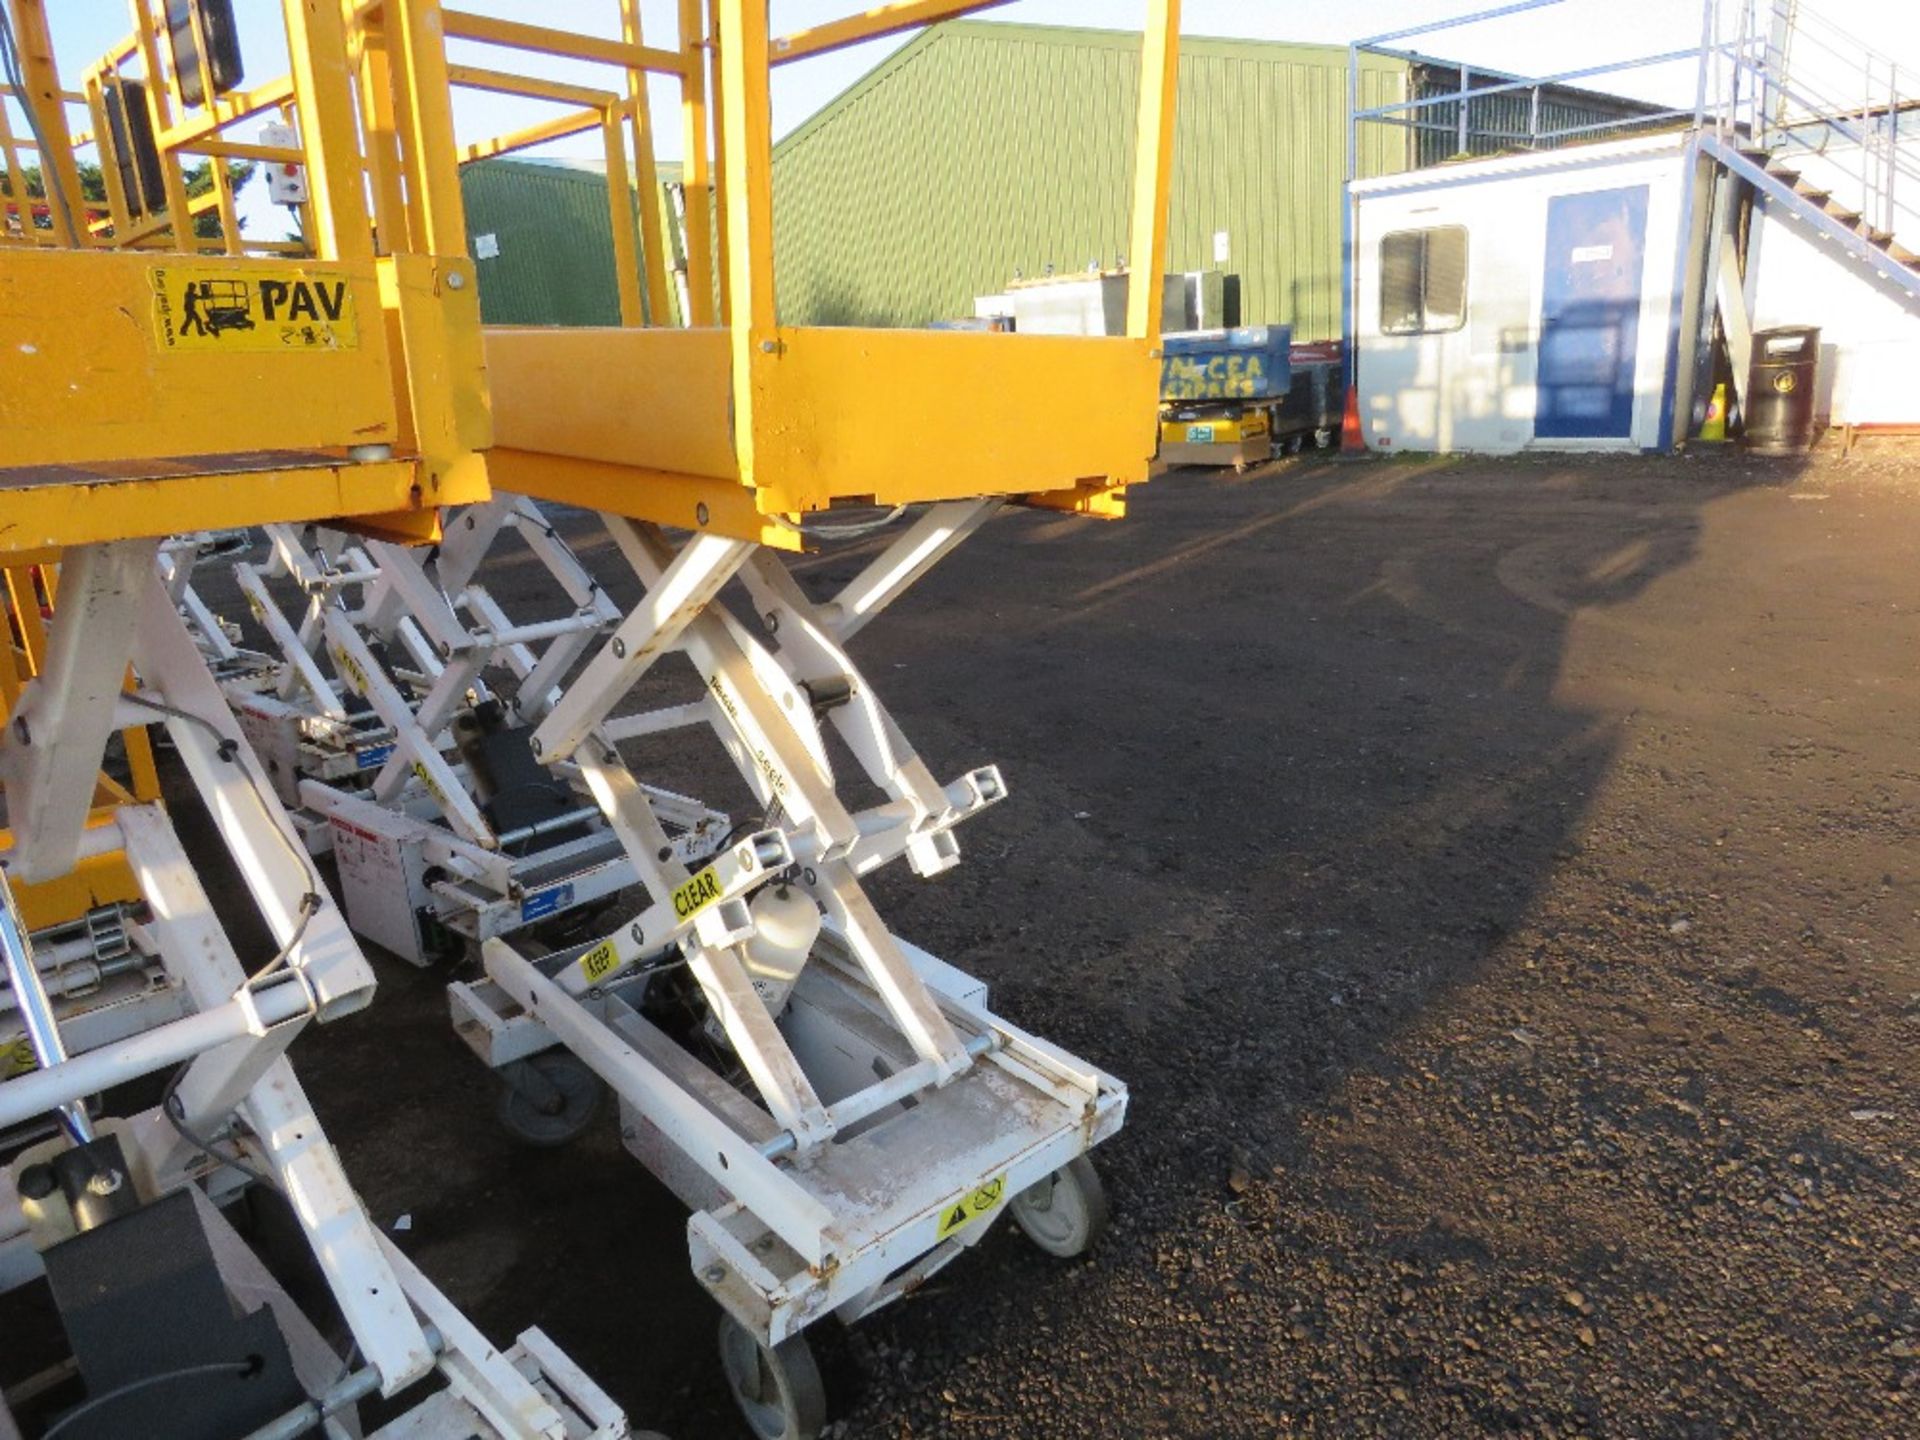 HYBRID HBP3.6 YELLOW BATTERY POWERED ACCESS PLATFORM, 3.6M MAX WORKING HEIGHT. PN:E04/10220. WHEN TE - Image 2 of 7